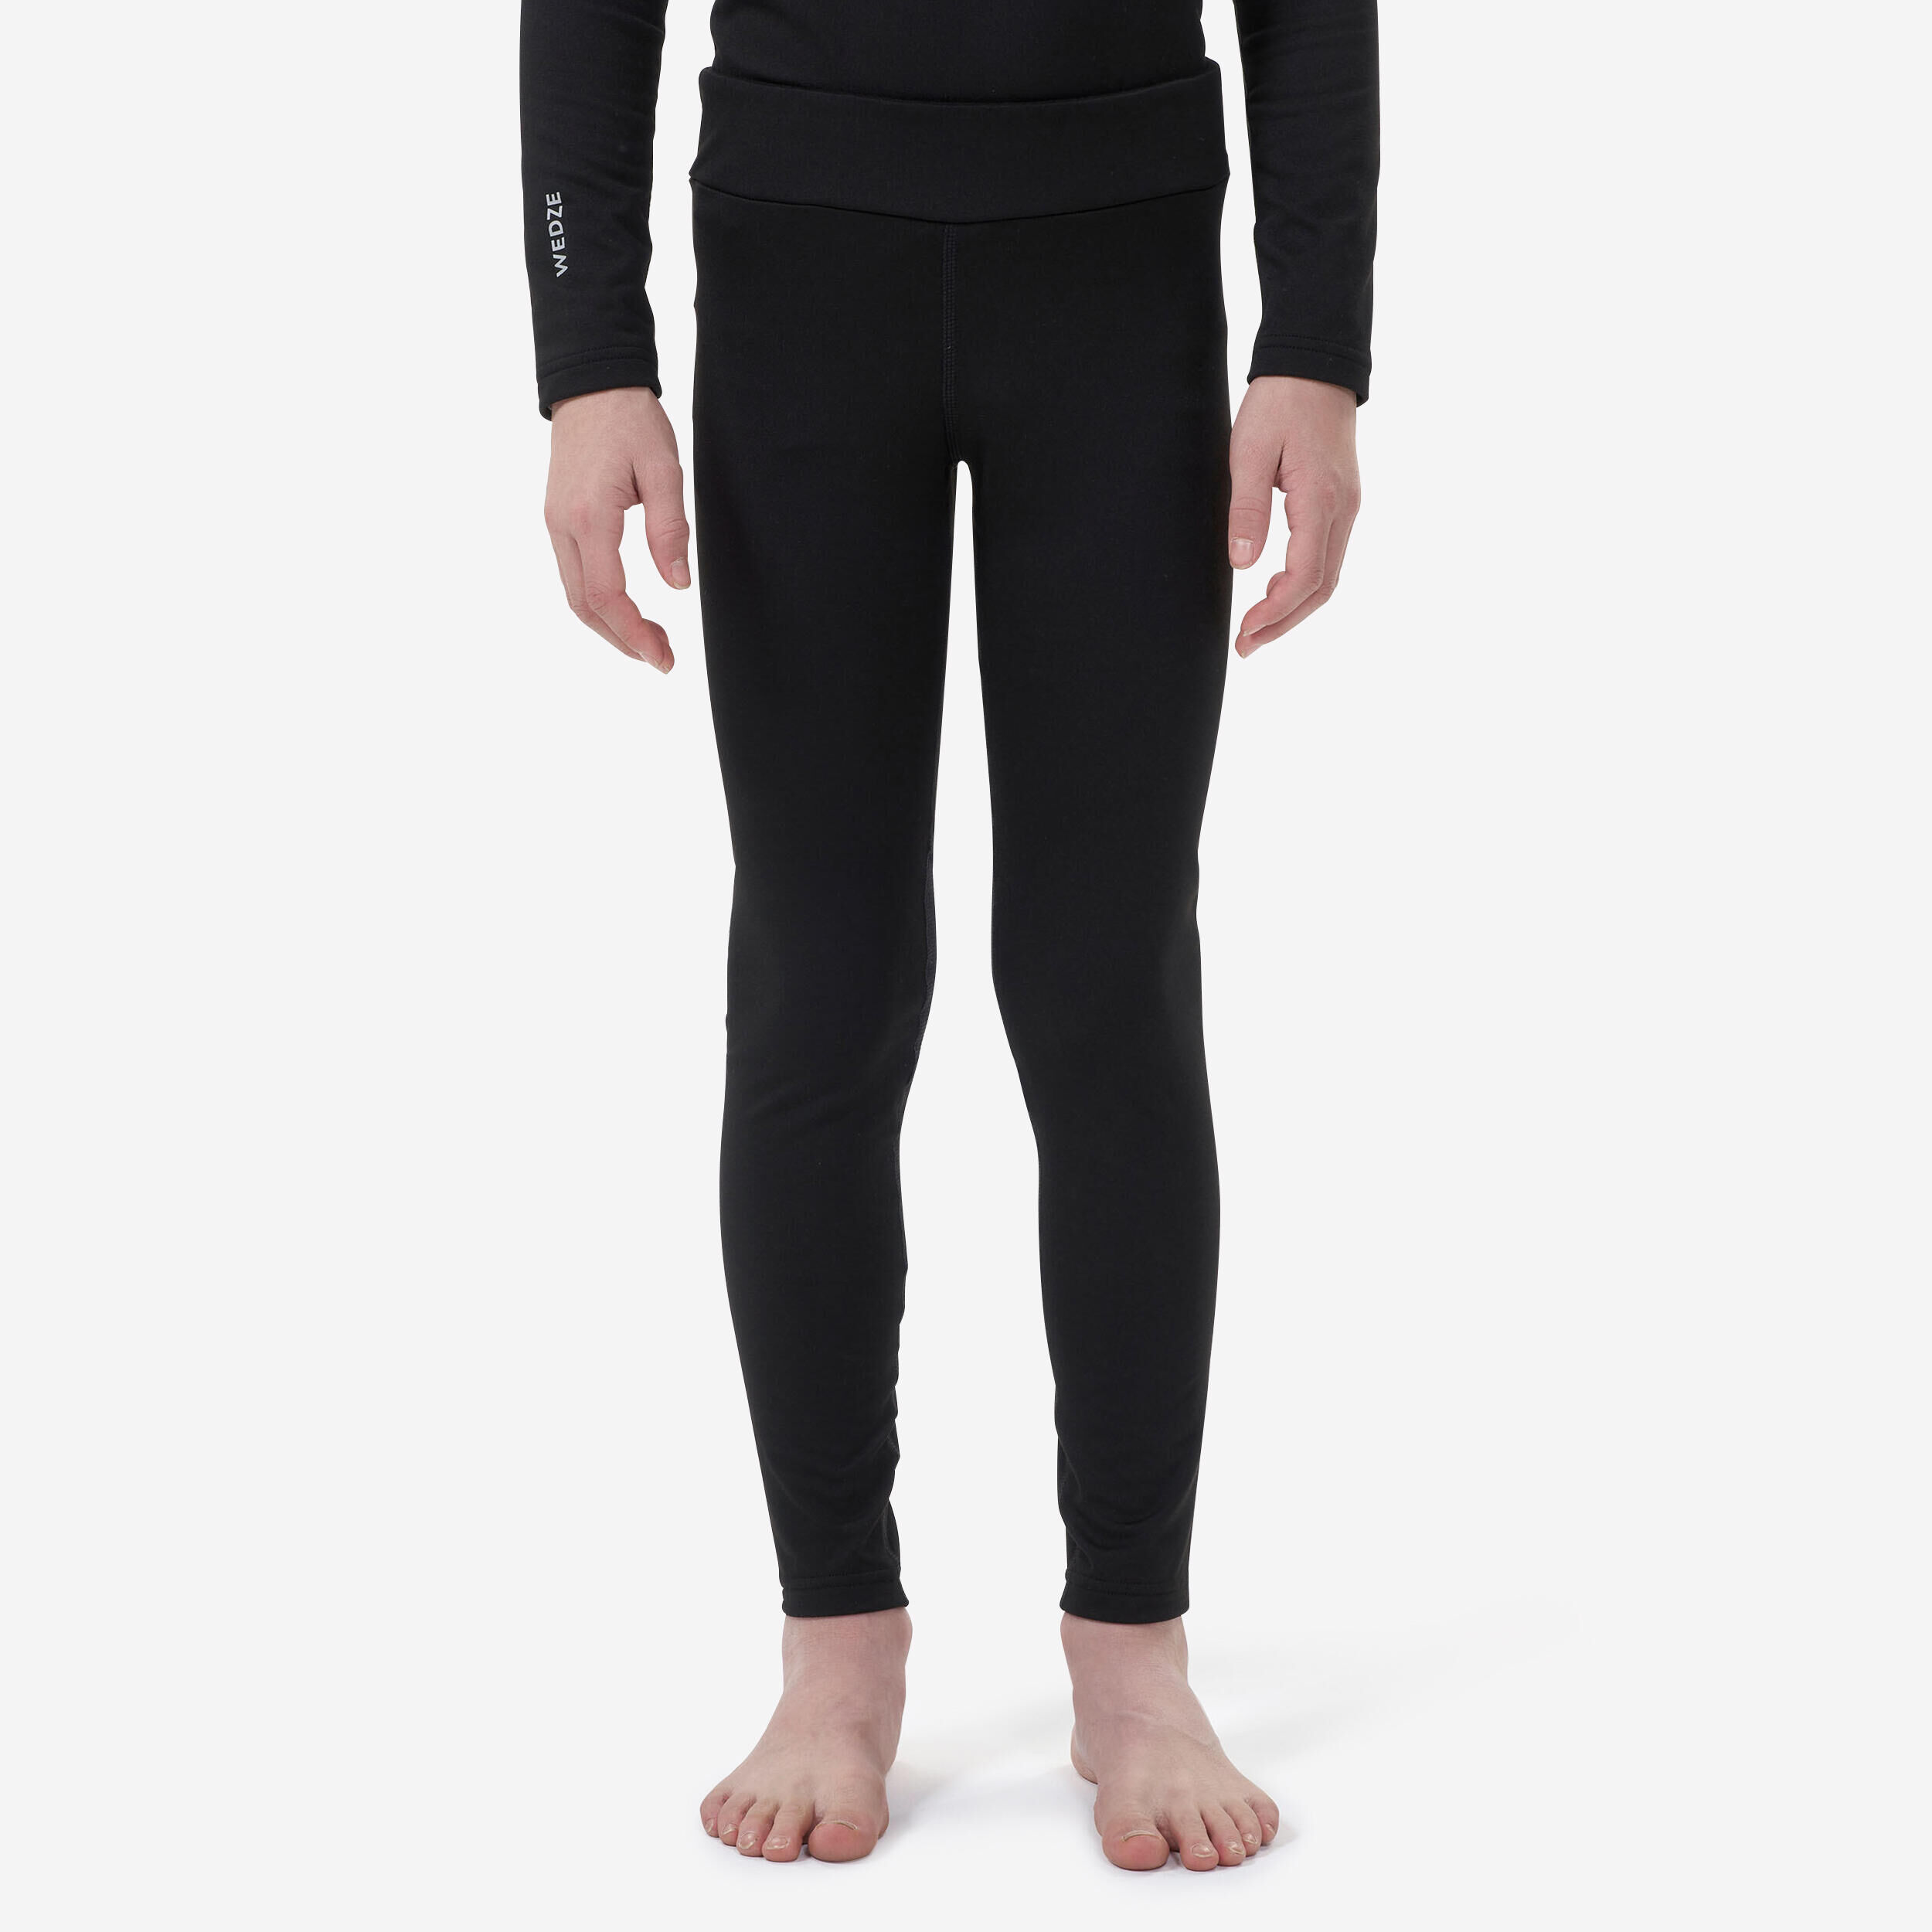  Youth Thermal Underwear